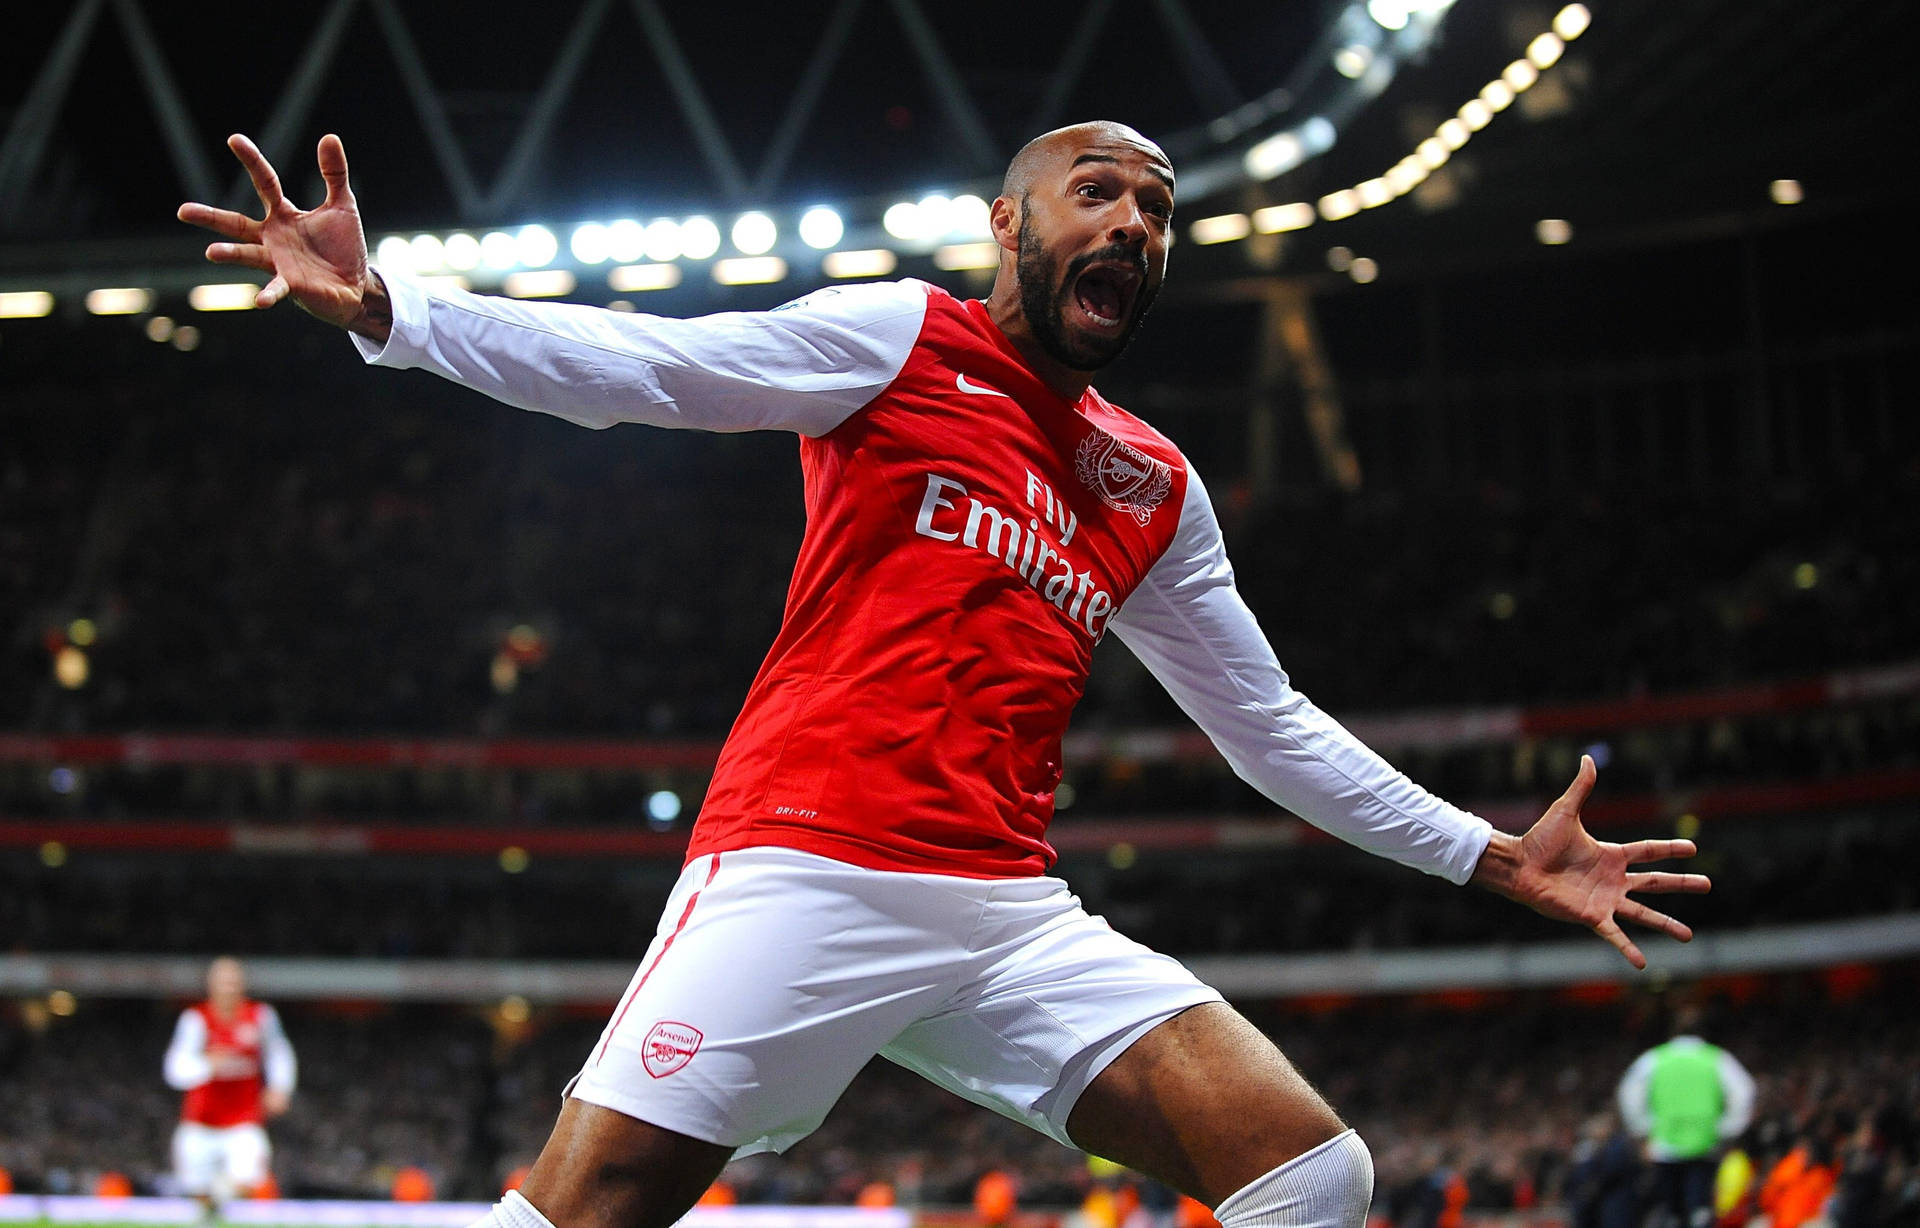 Ex-Arsenal Legend Thierry Henry Will Be a Playable Character in NBA 2K17